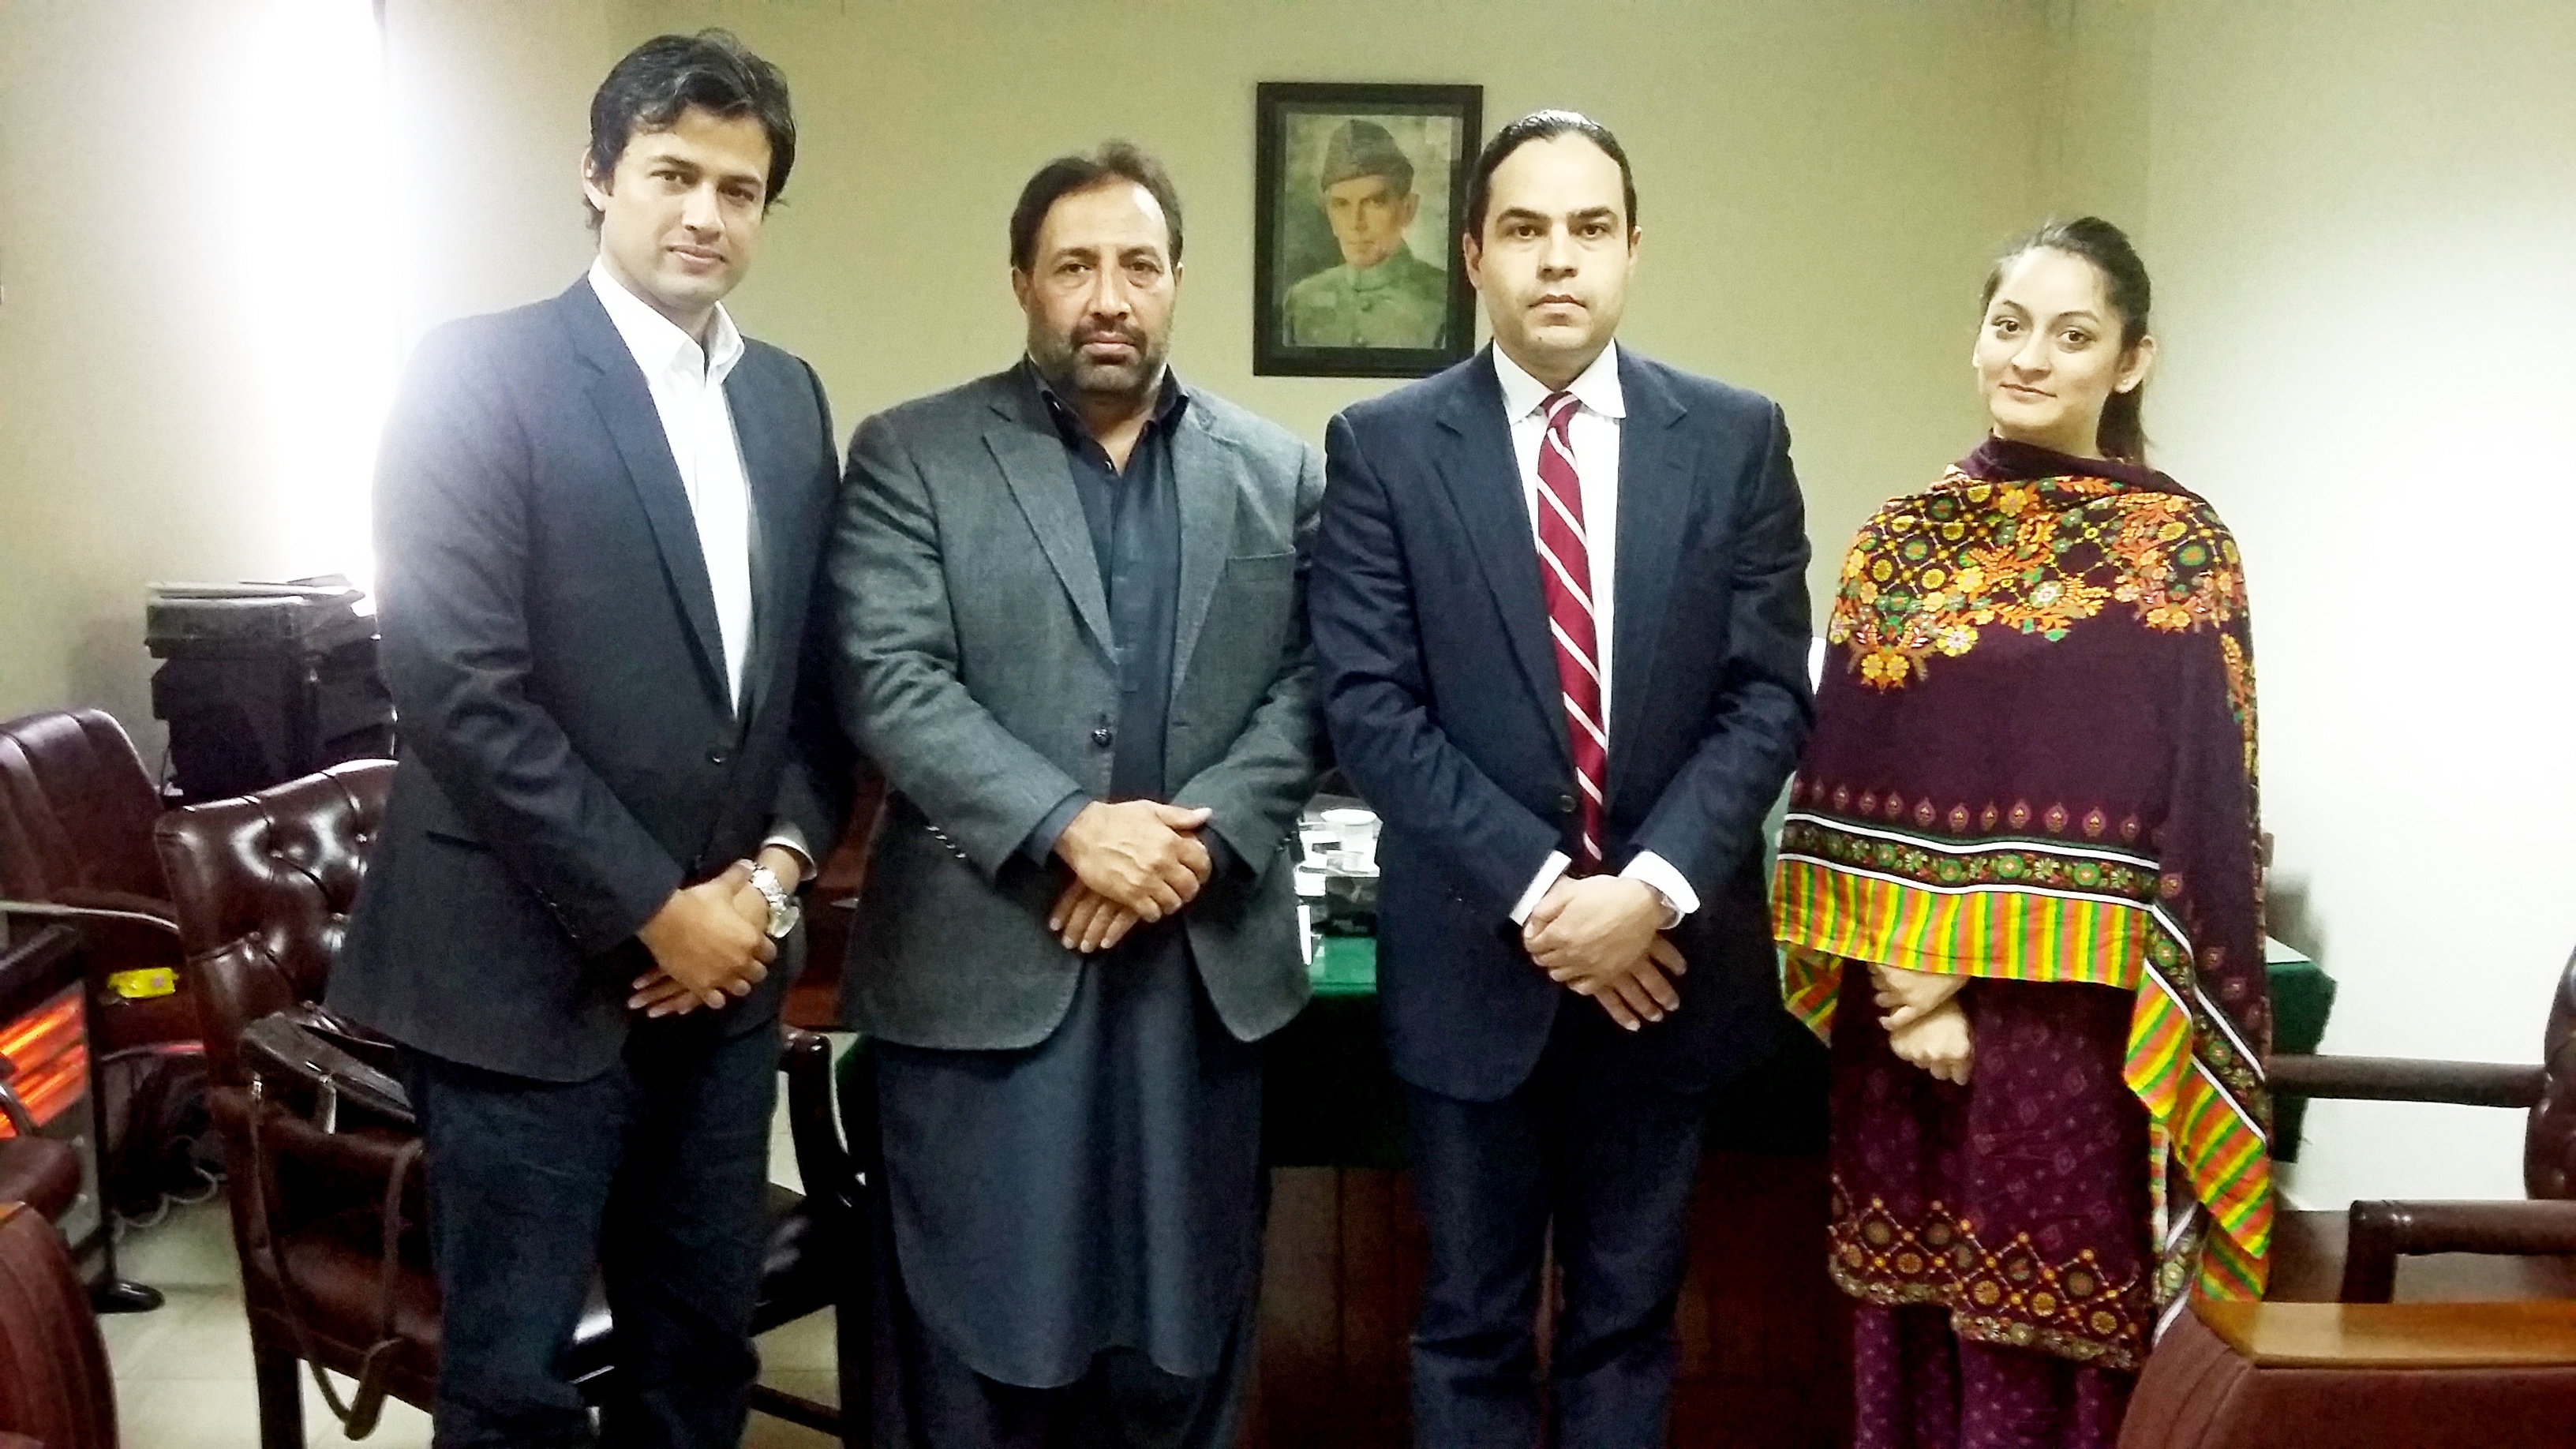 PJN Team Visit to National Commission of Human Rights